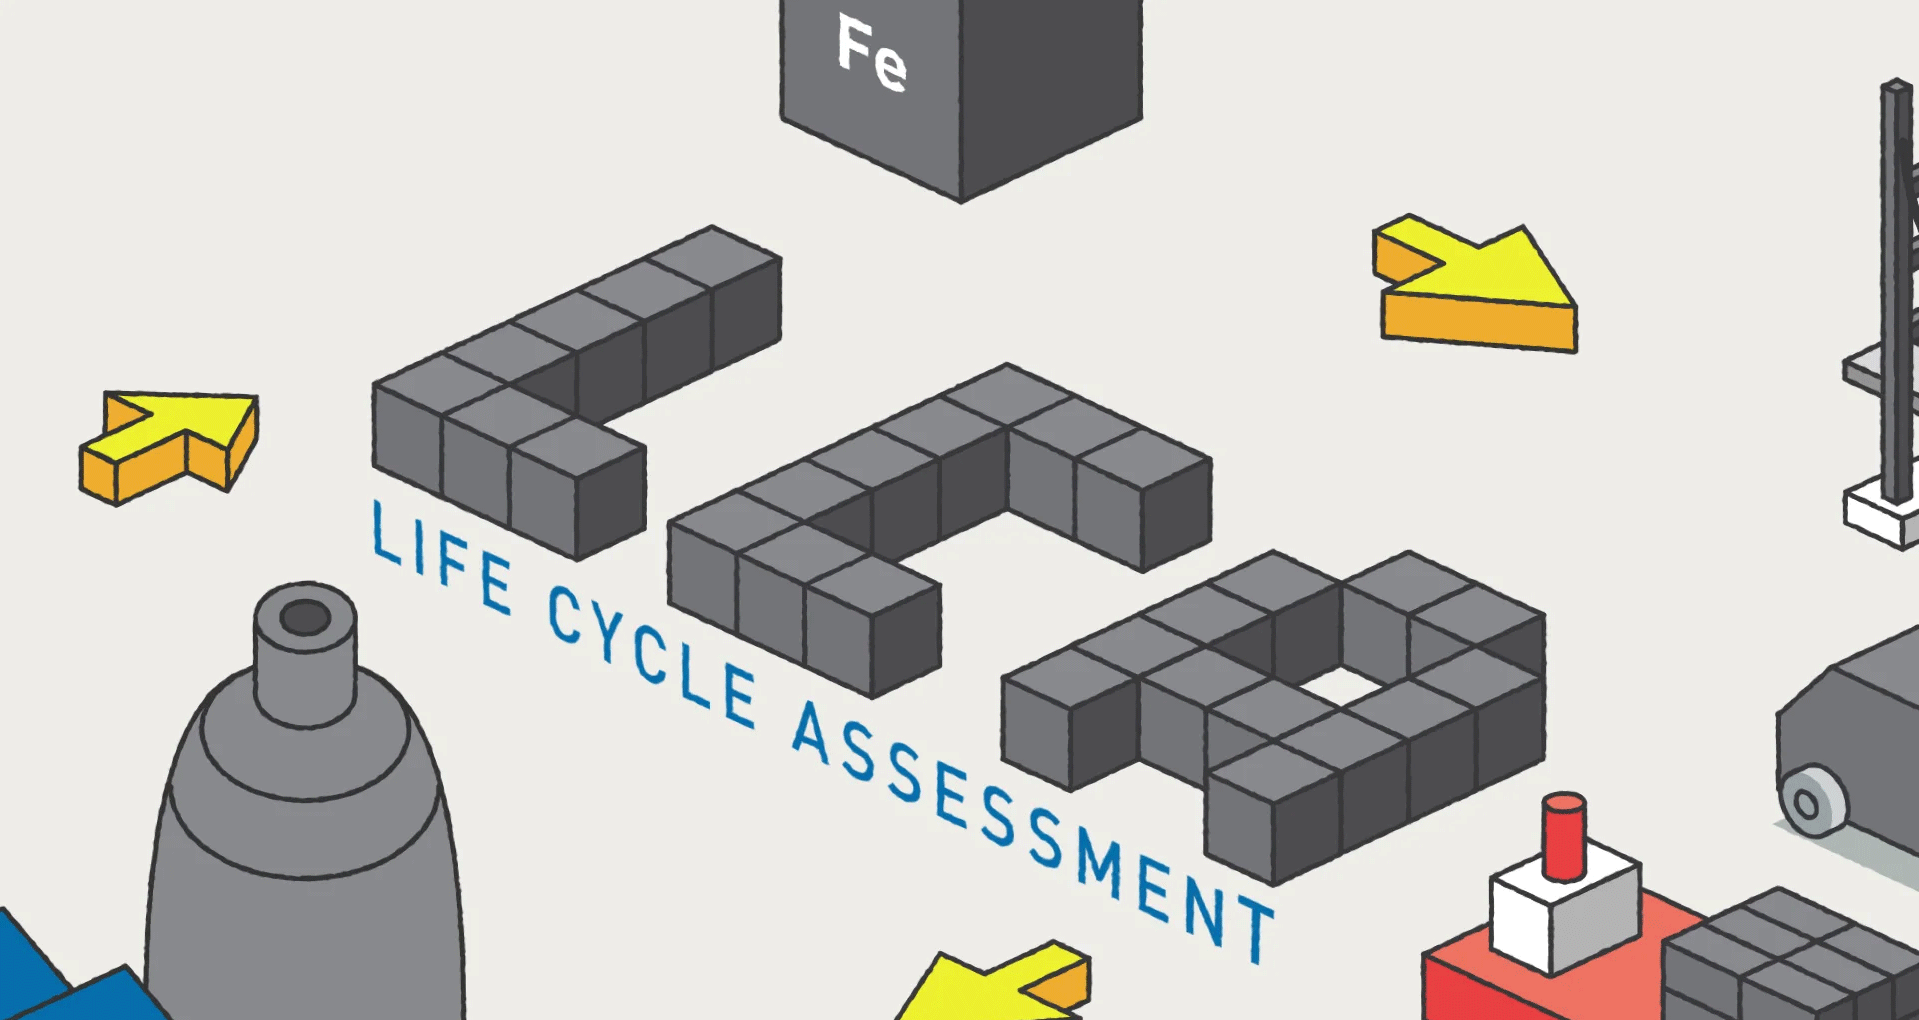 LIFE CYCLE ASSESSMENT